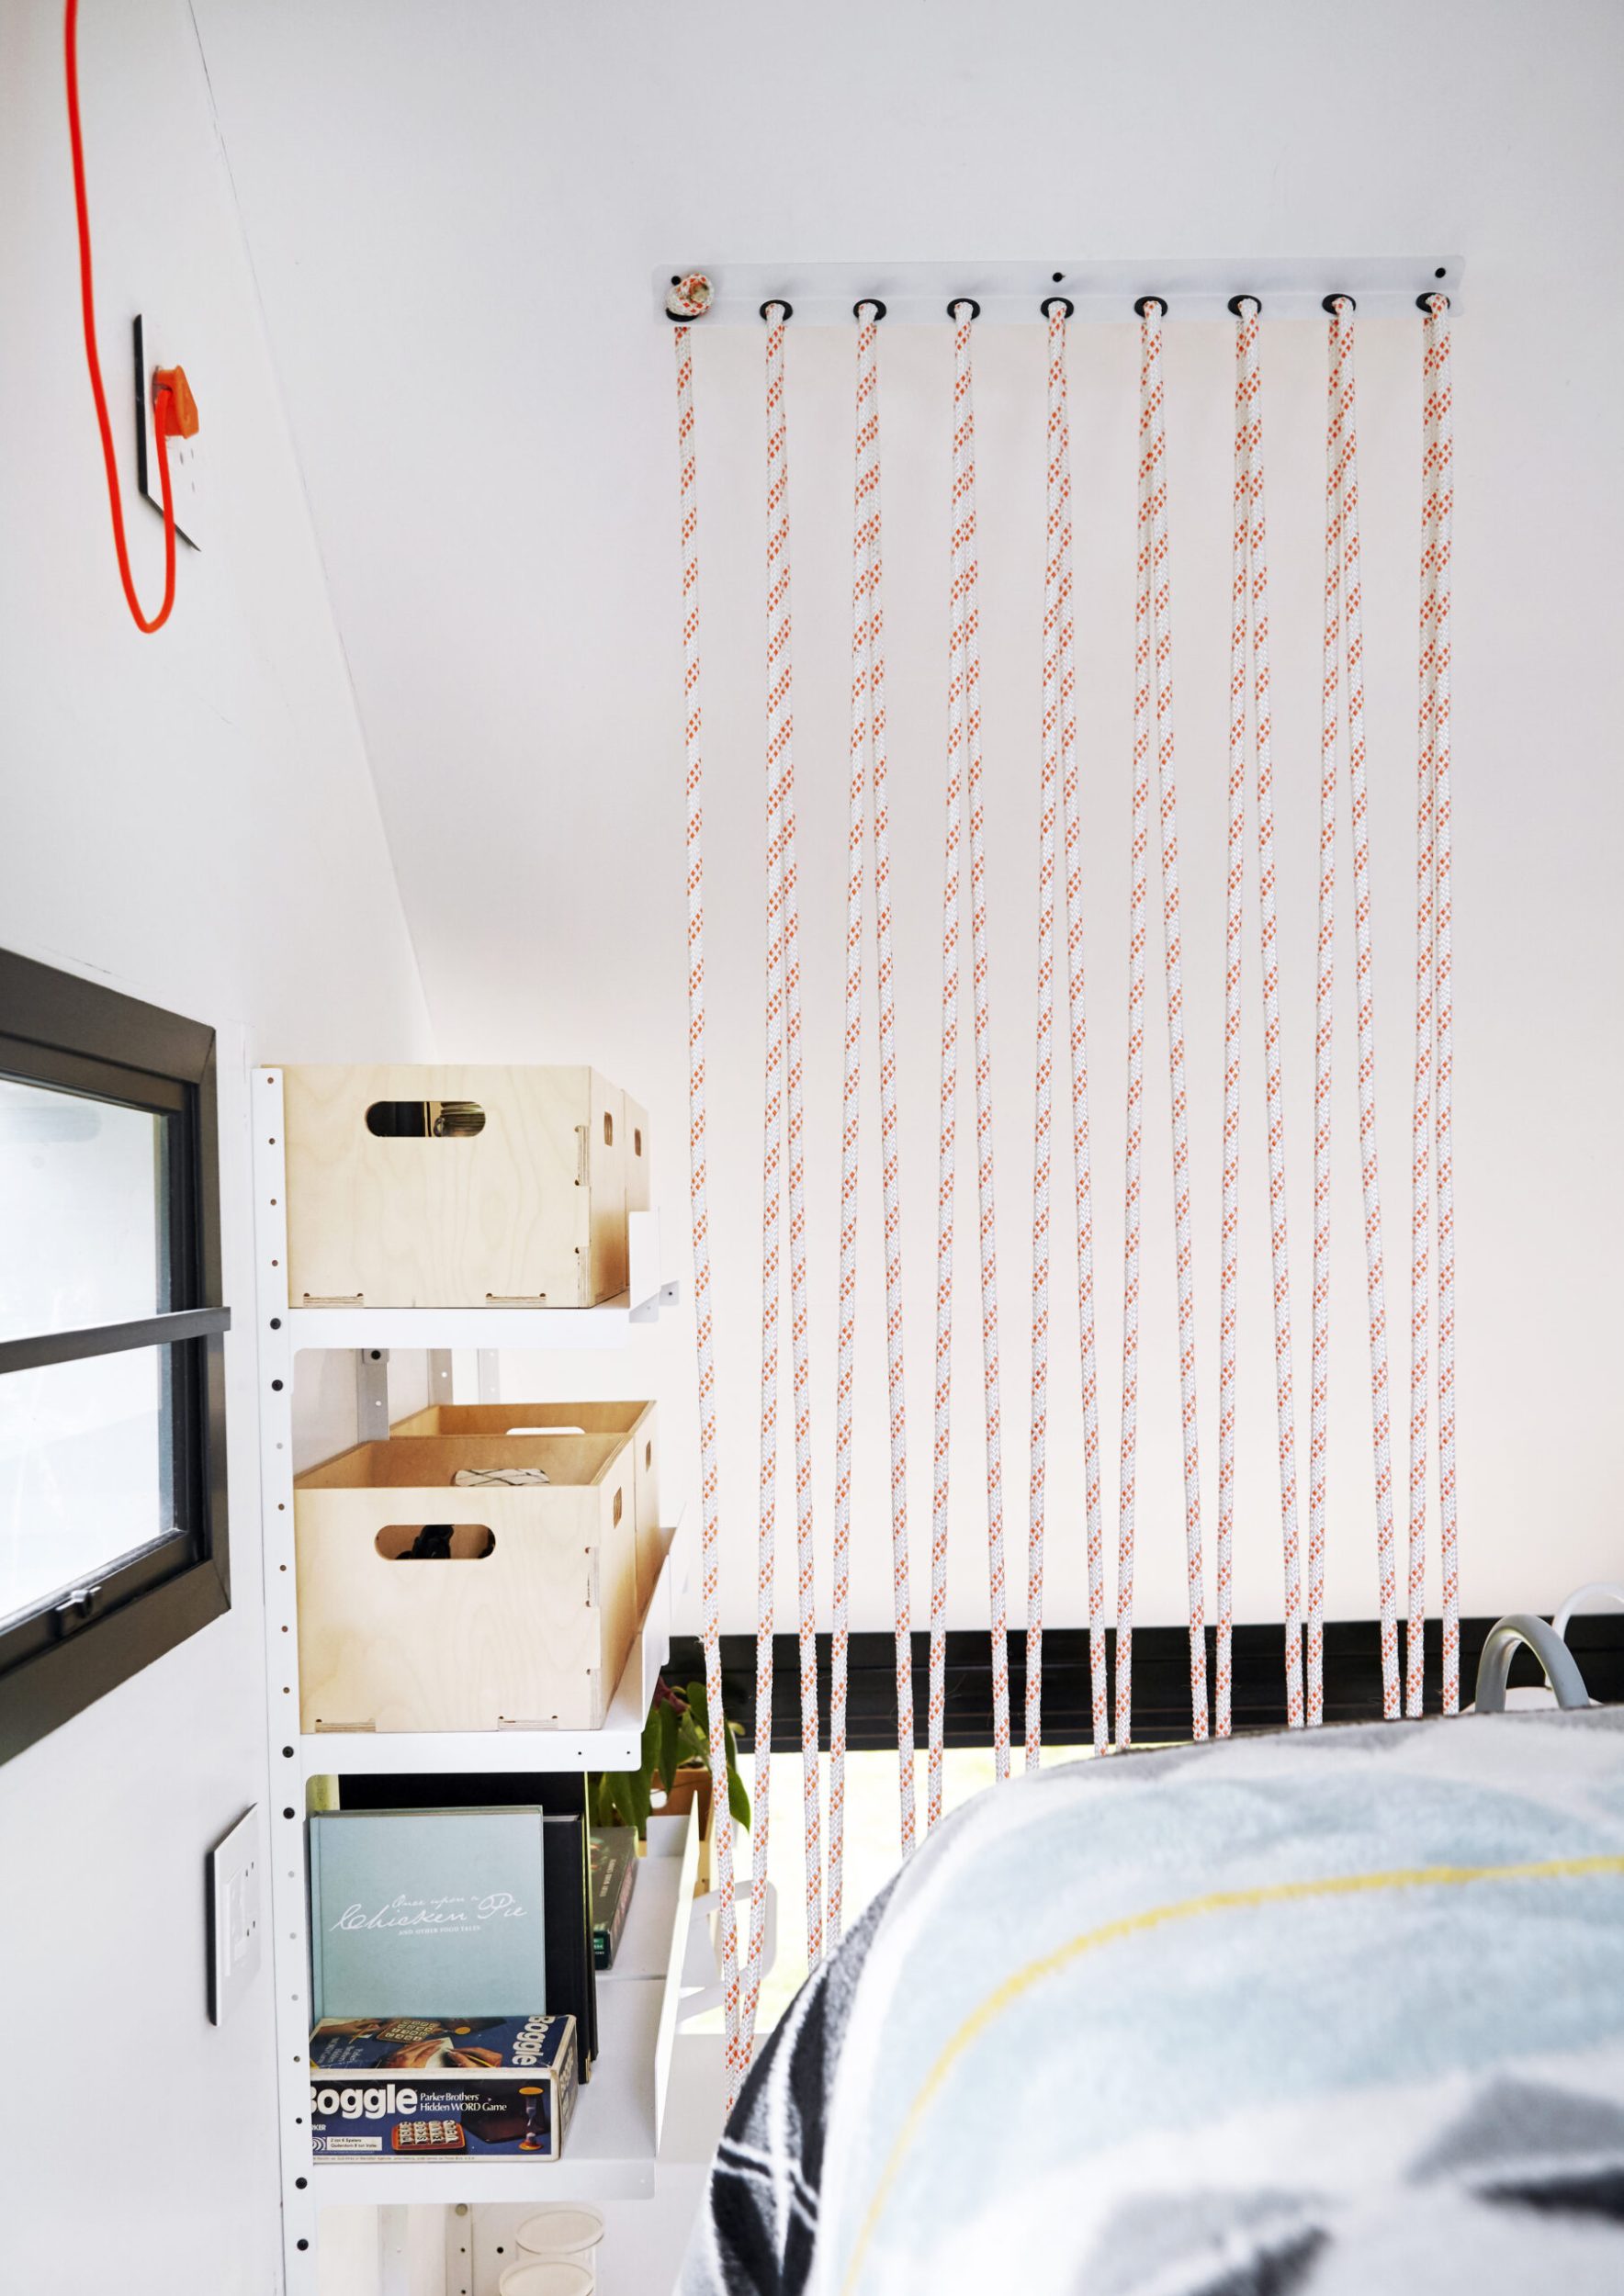 A small bedroom with a hanging electrical cord 